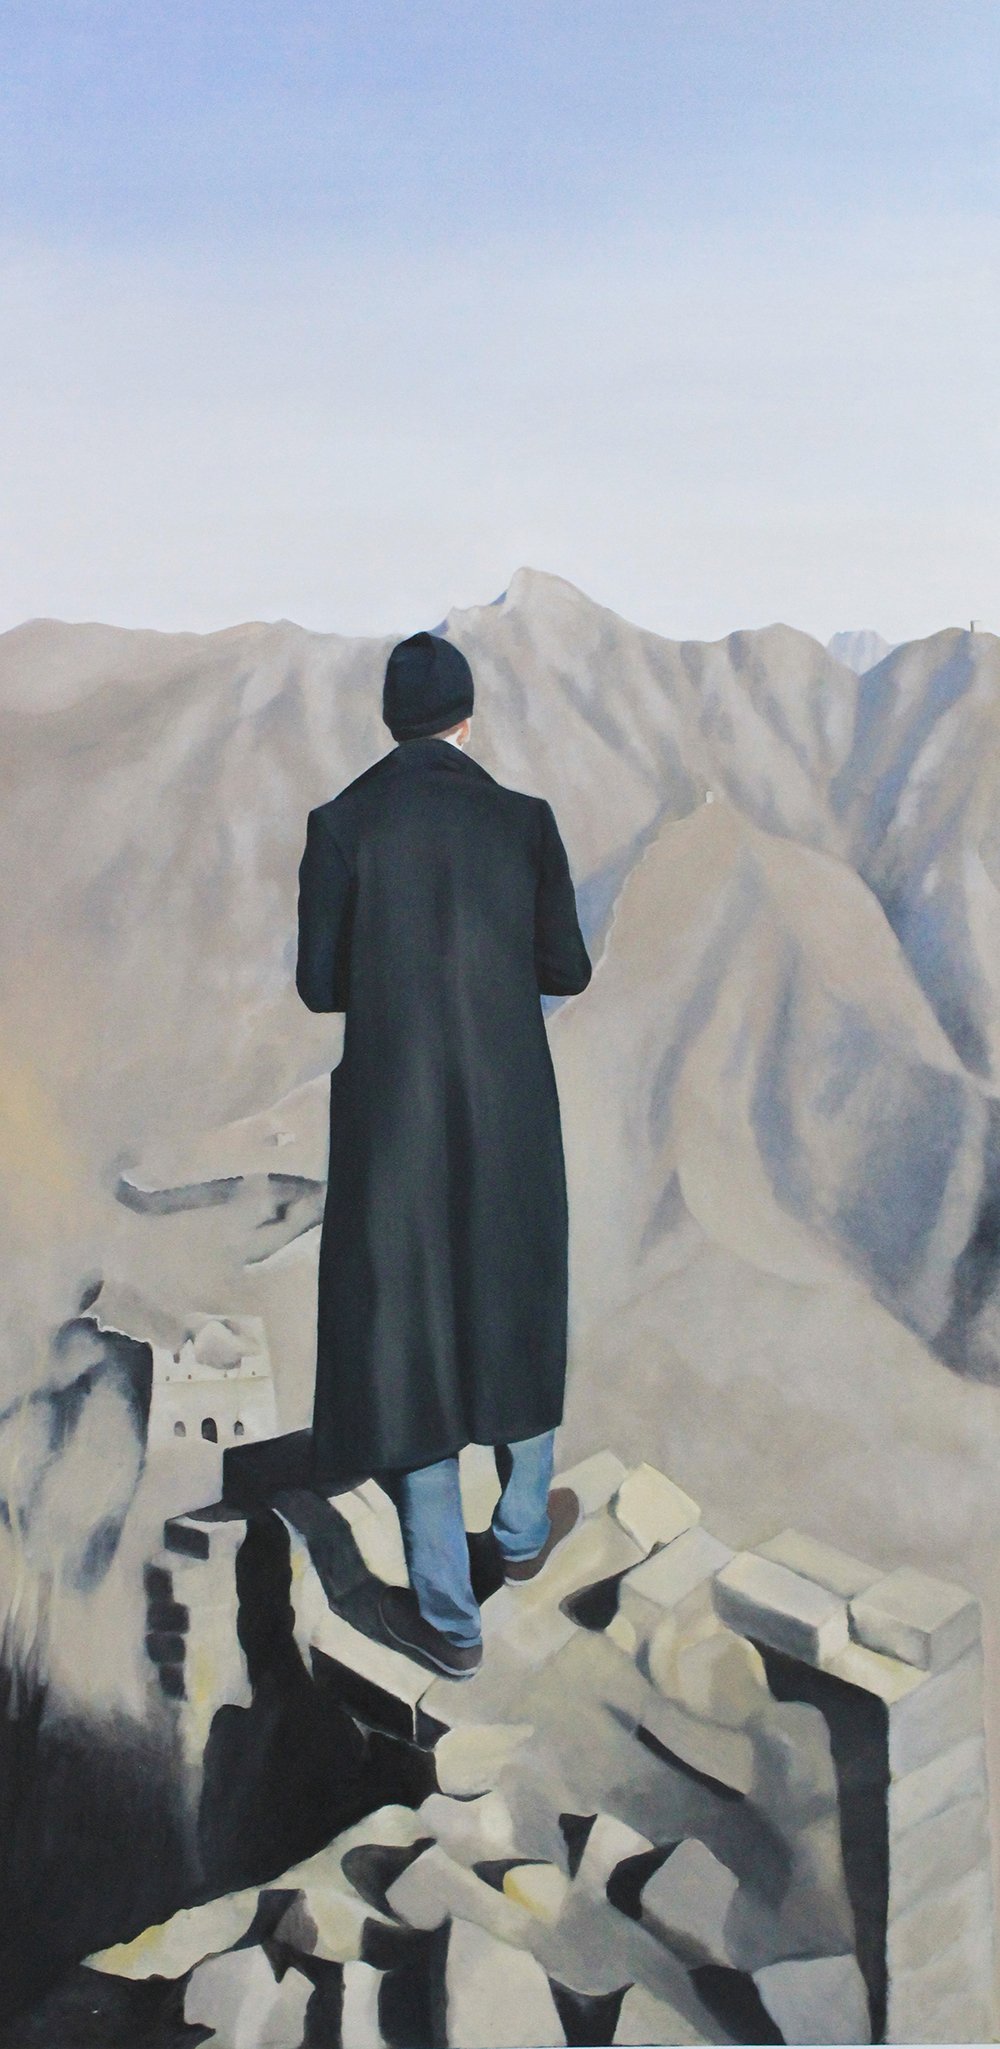 5_Thoughts about mans follies, 220cm x 140cm, oil on canvas, 2012.jpg